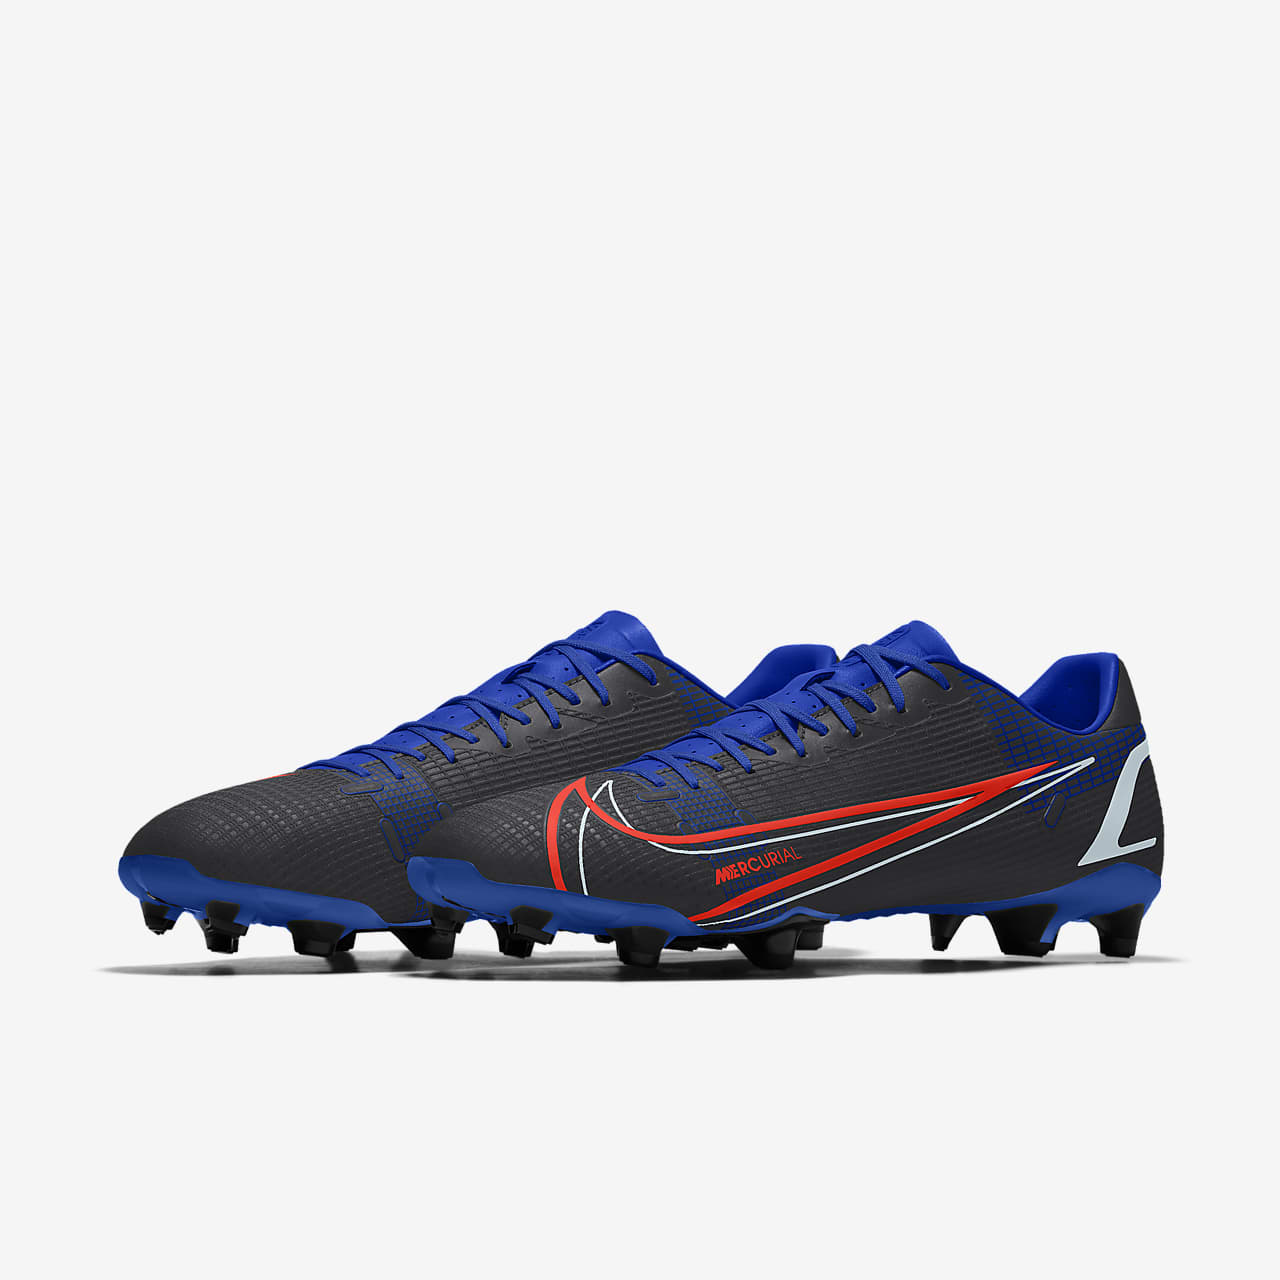 save Nonsense Engaged Nike Mercurial Vapor 14 Academy By You Custom Football Boots. Nike ID